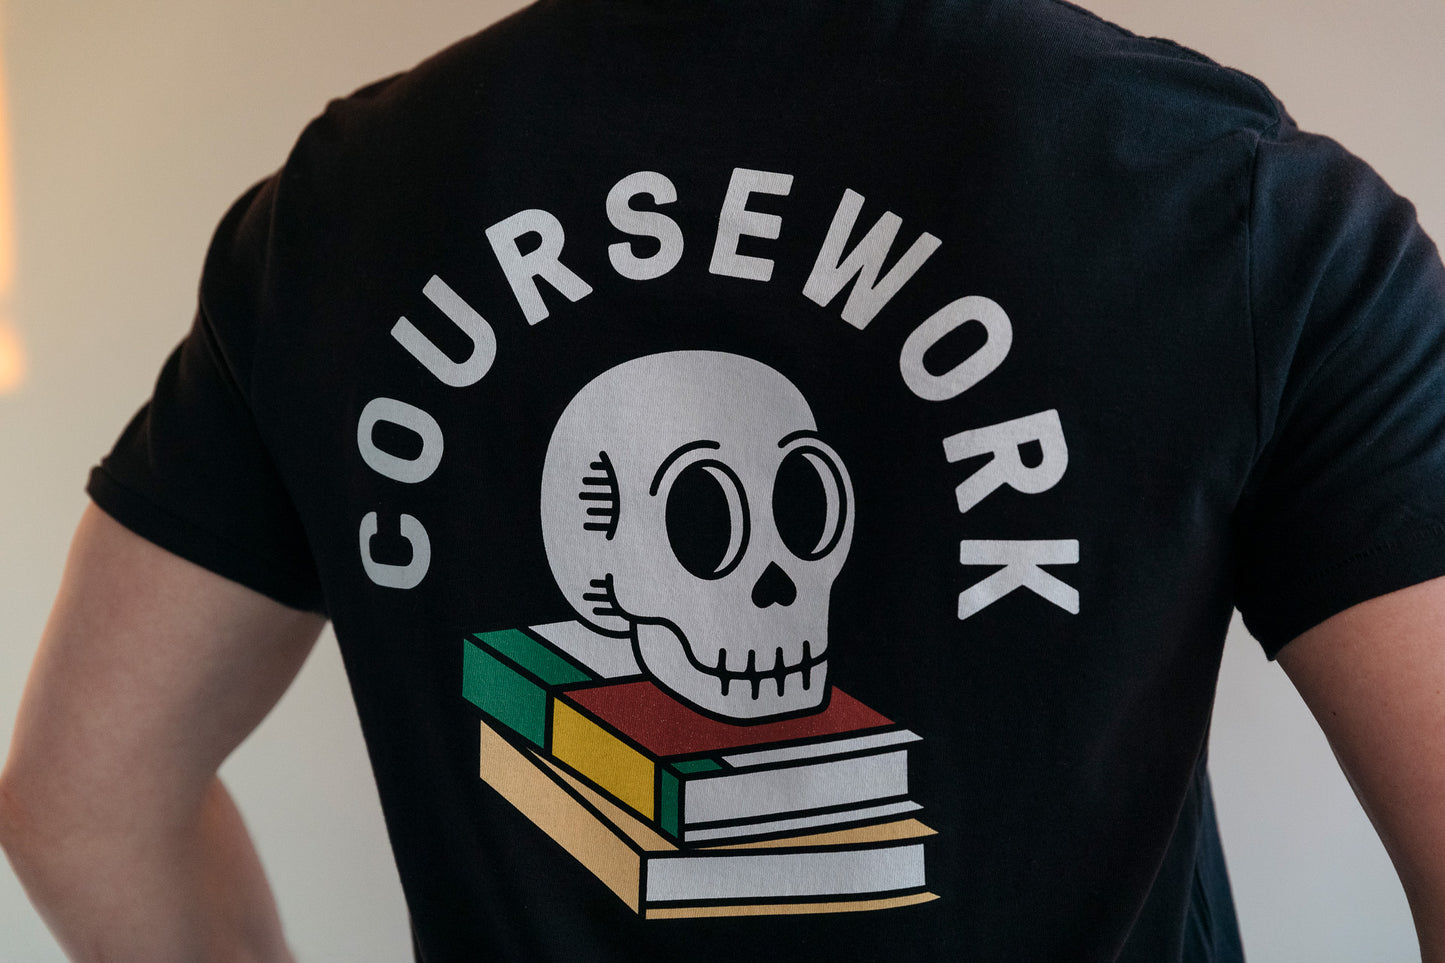 Required Reading Tee - Black